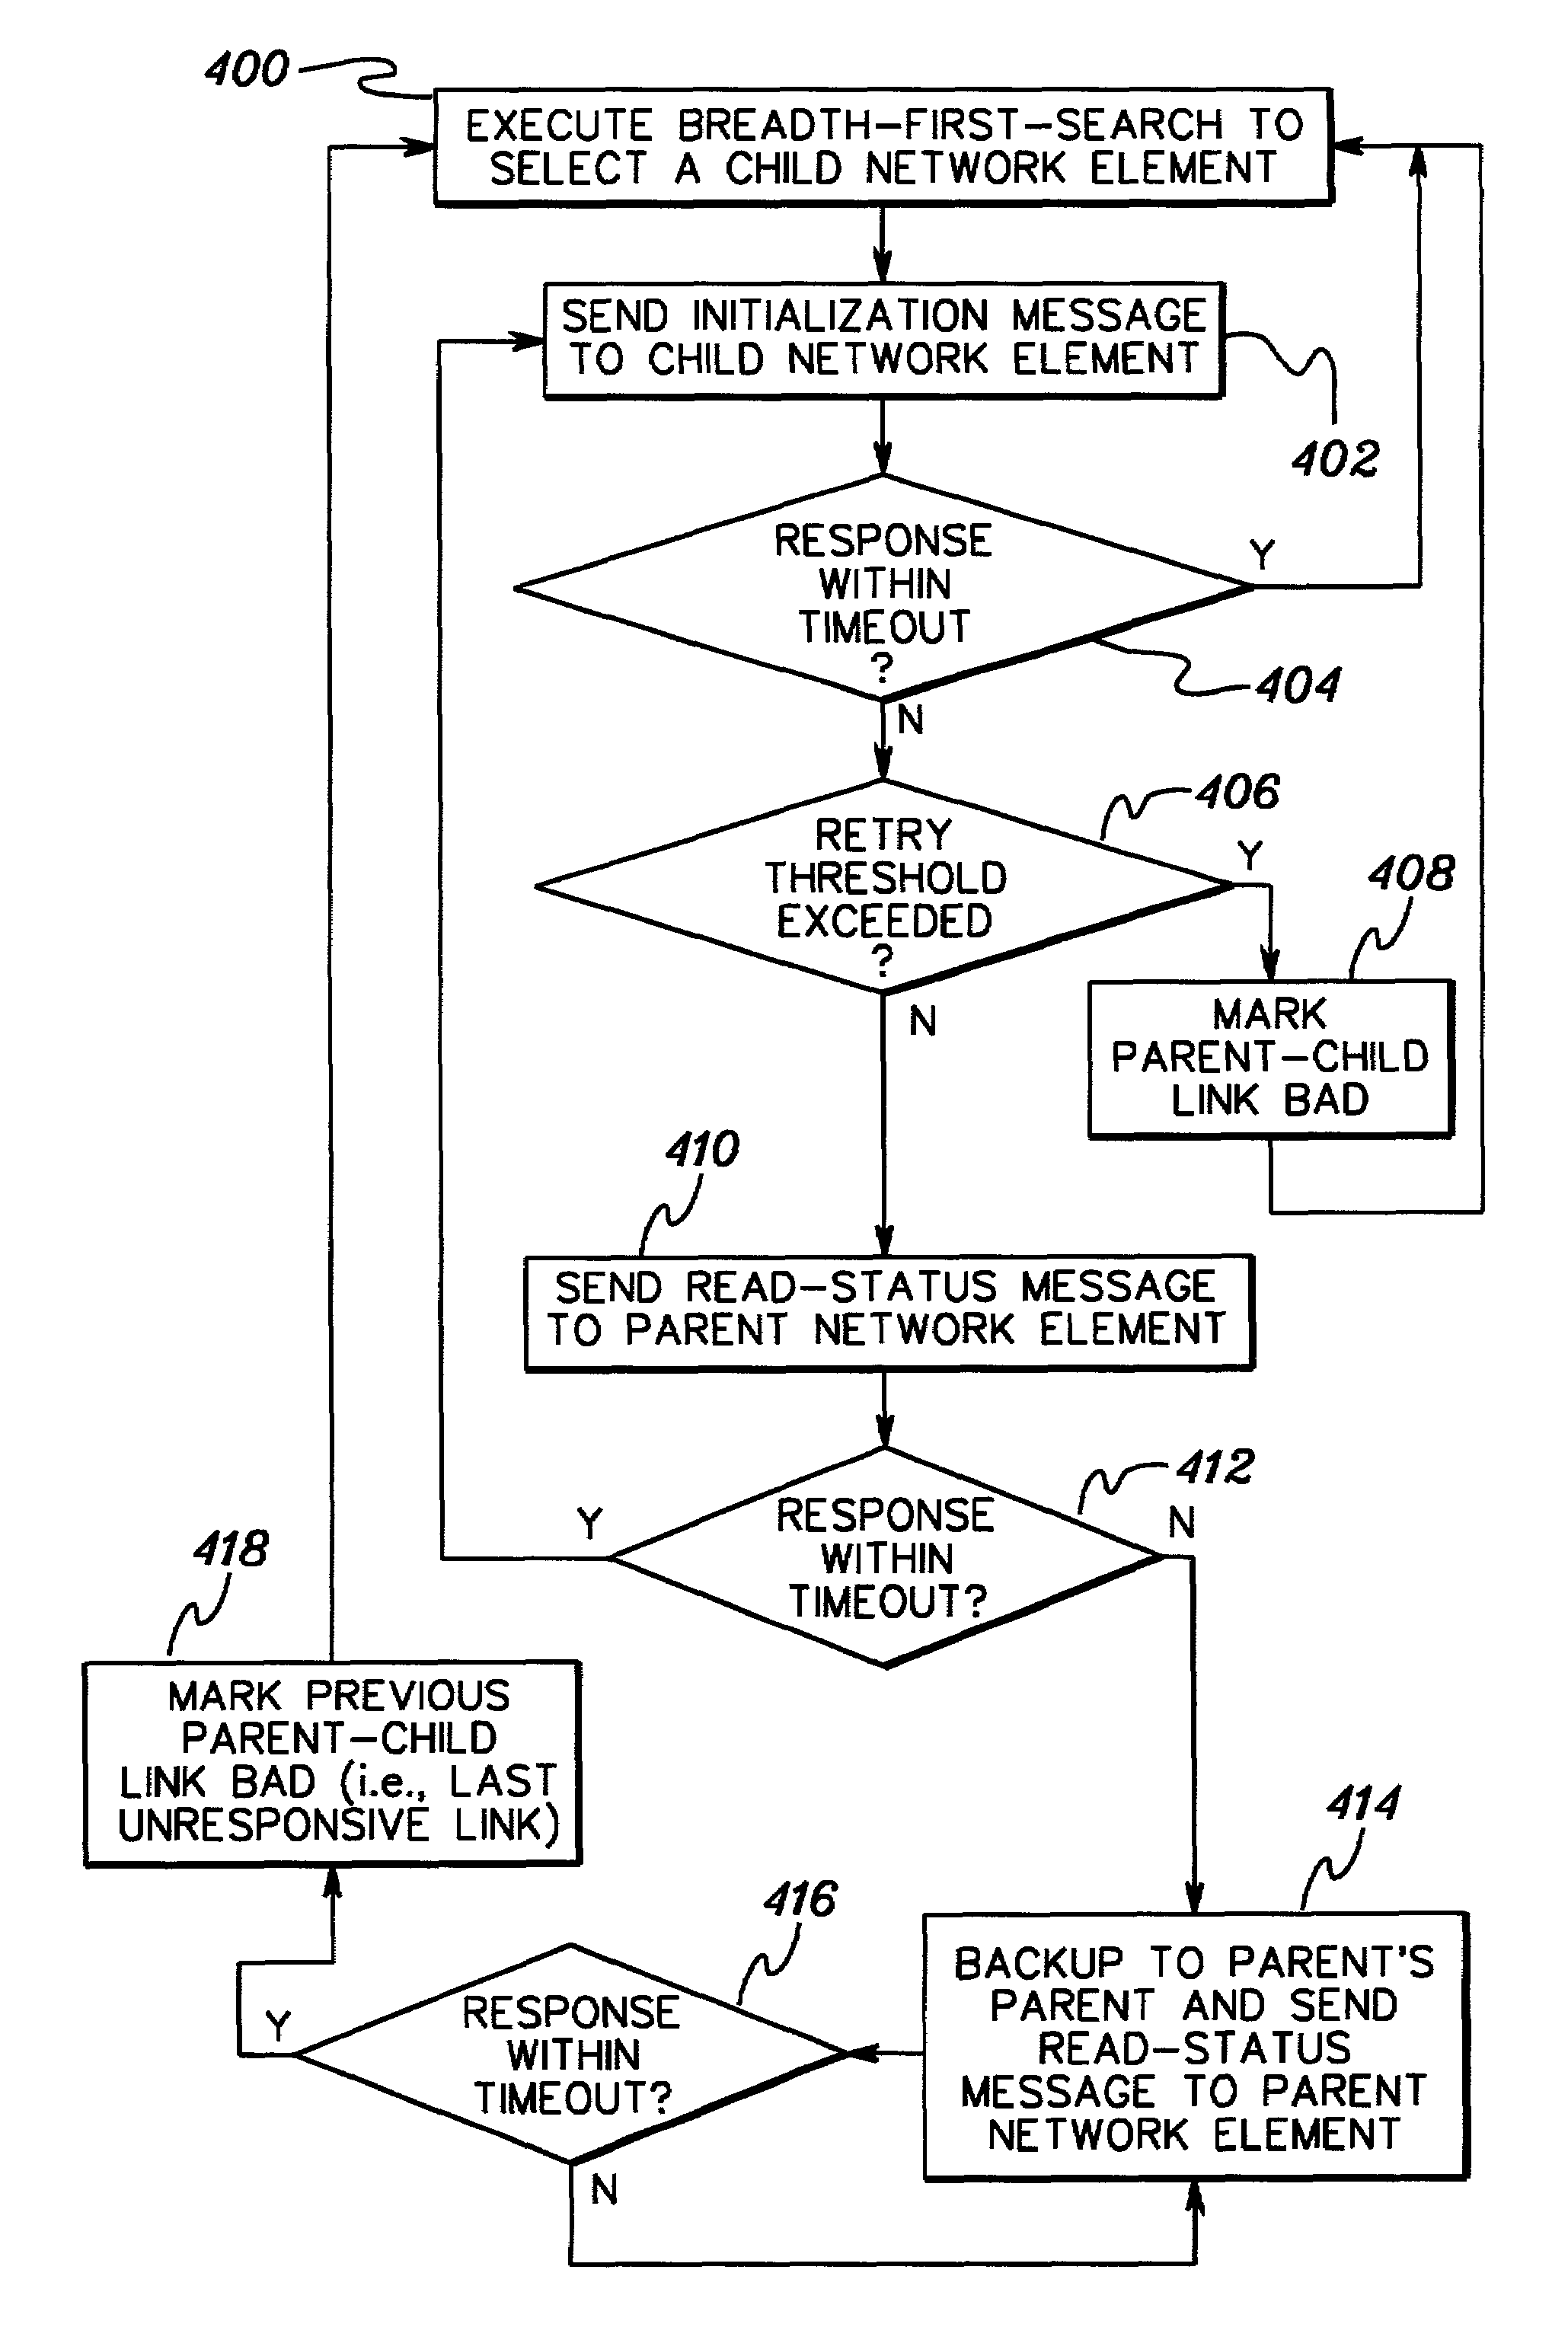 Identifying faulty network components during a network exploration